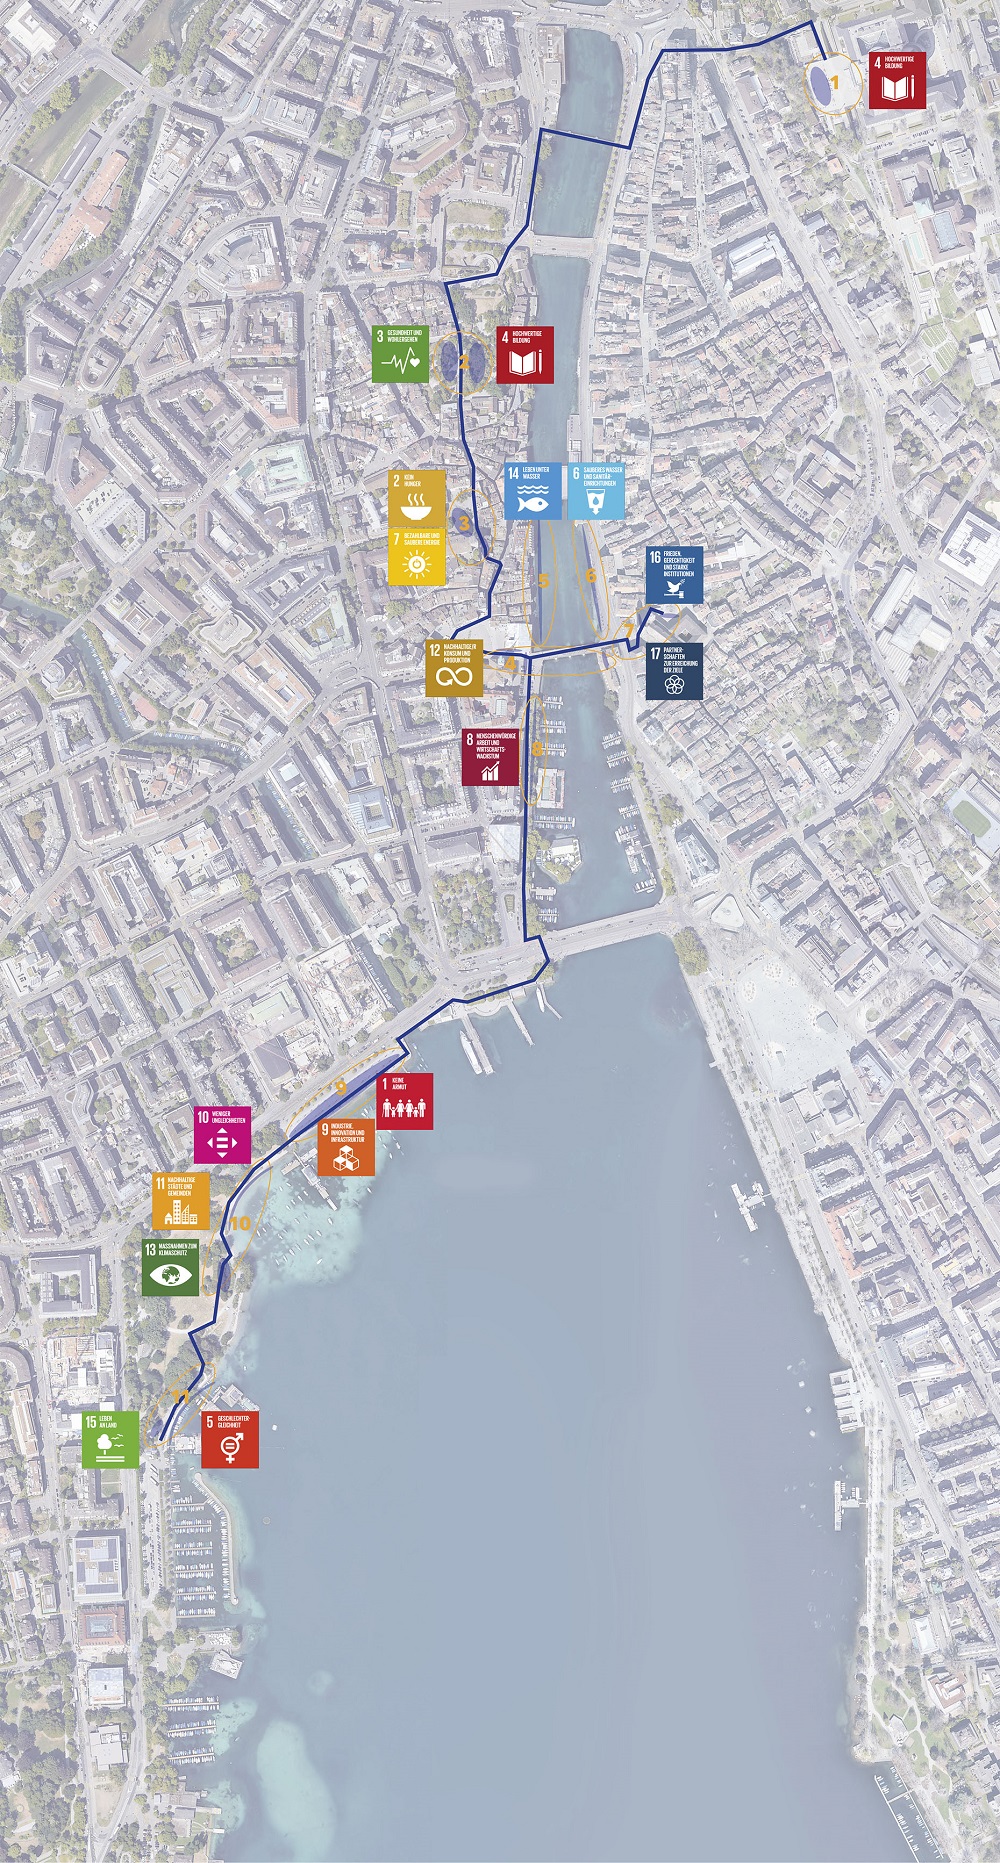 Map of Zurich including the places where the exhibition takes place